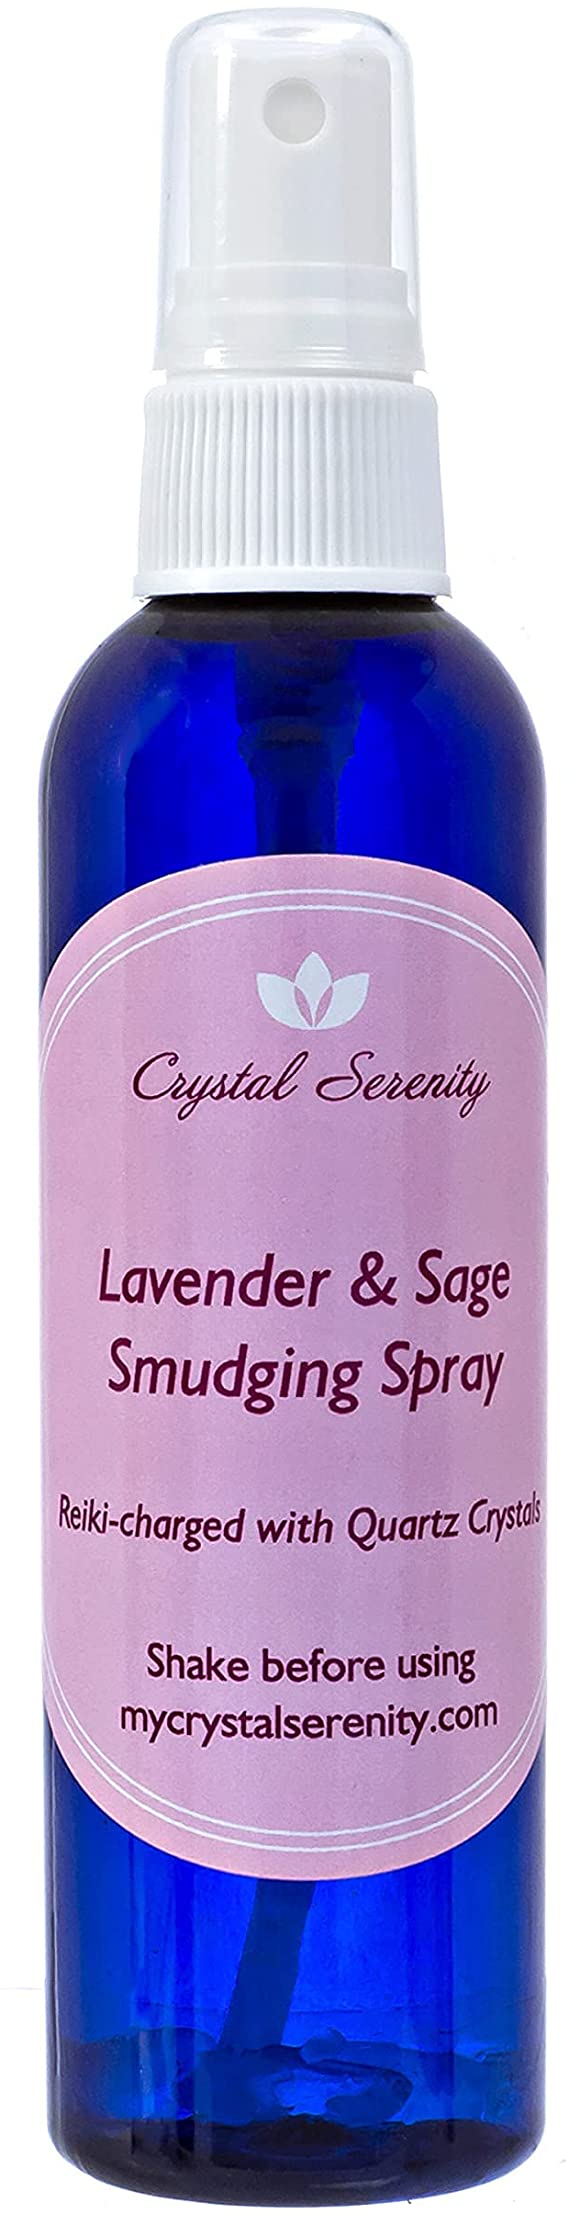 White Sage Smudge Spray: Lavender and Sage Smudging Spray with Quartz Crystals - Reiki Charged 4 oz